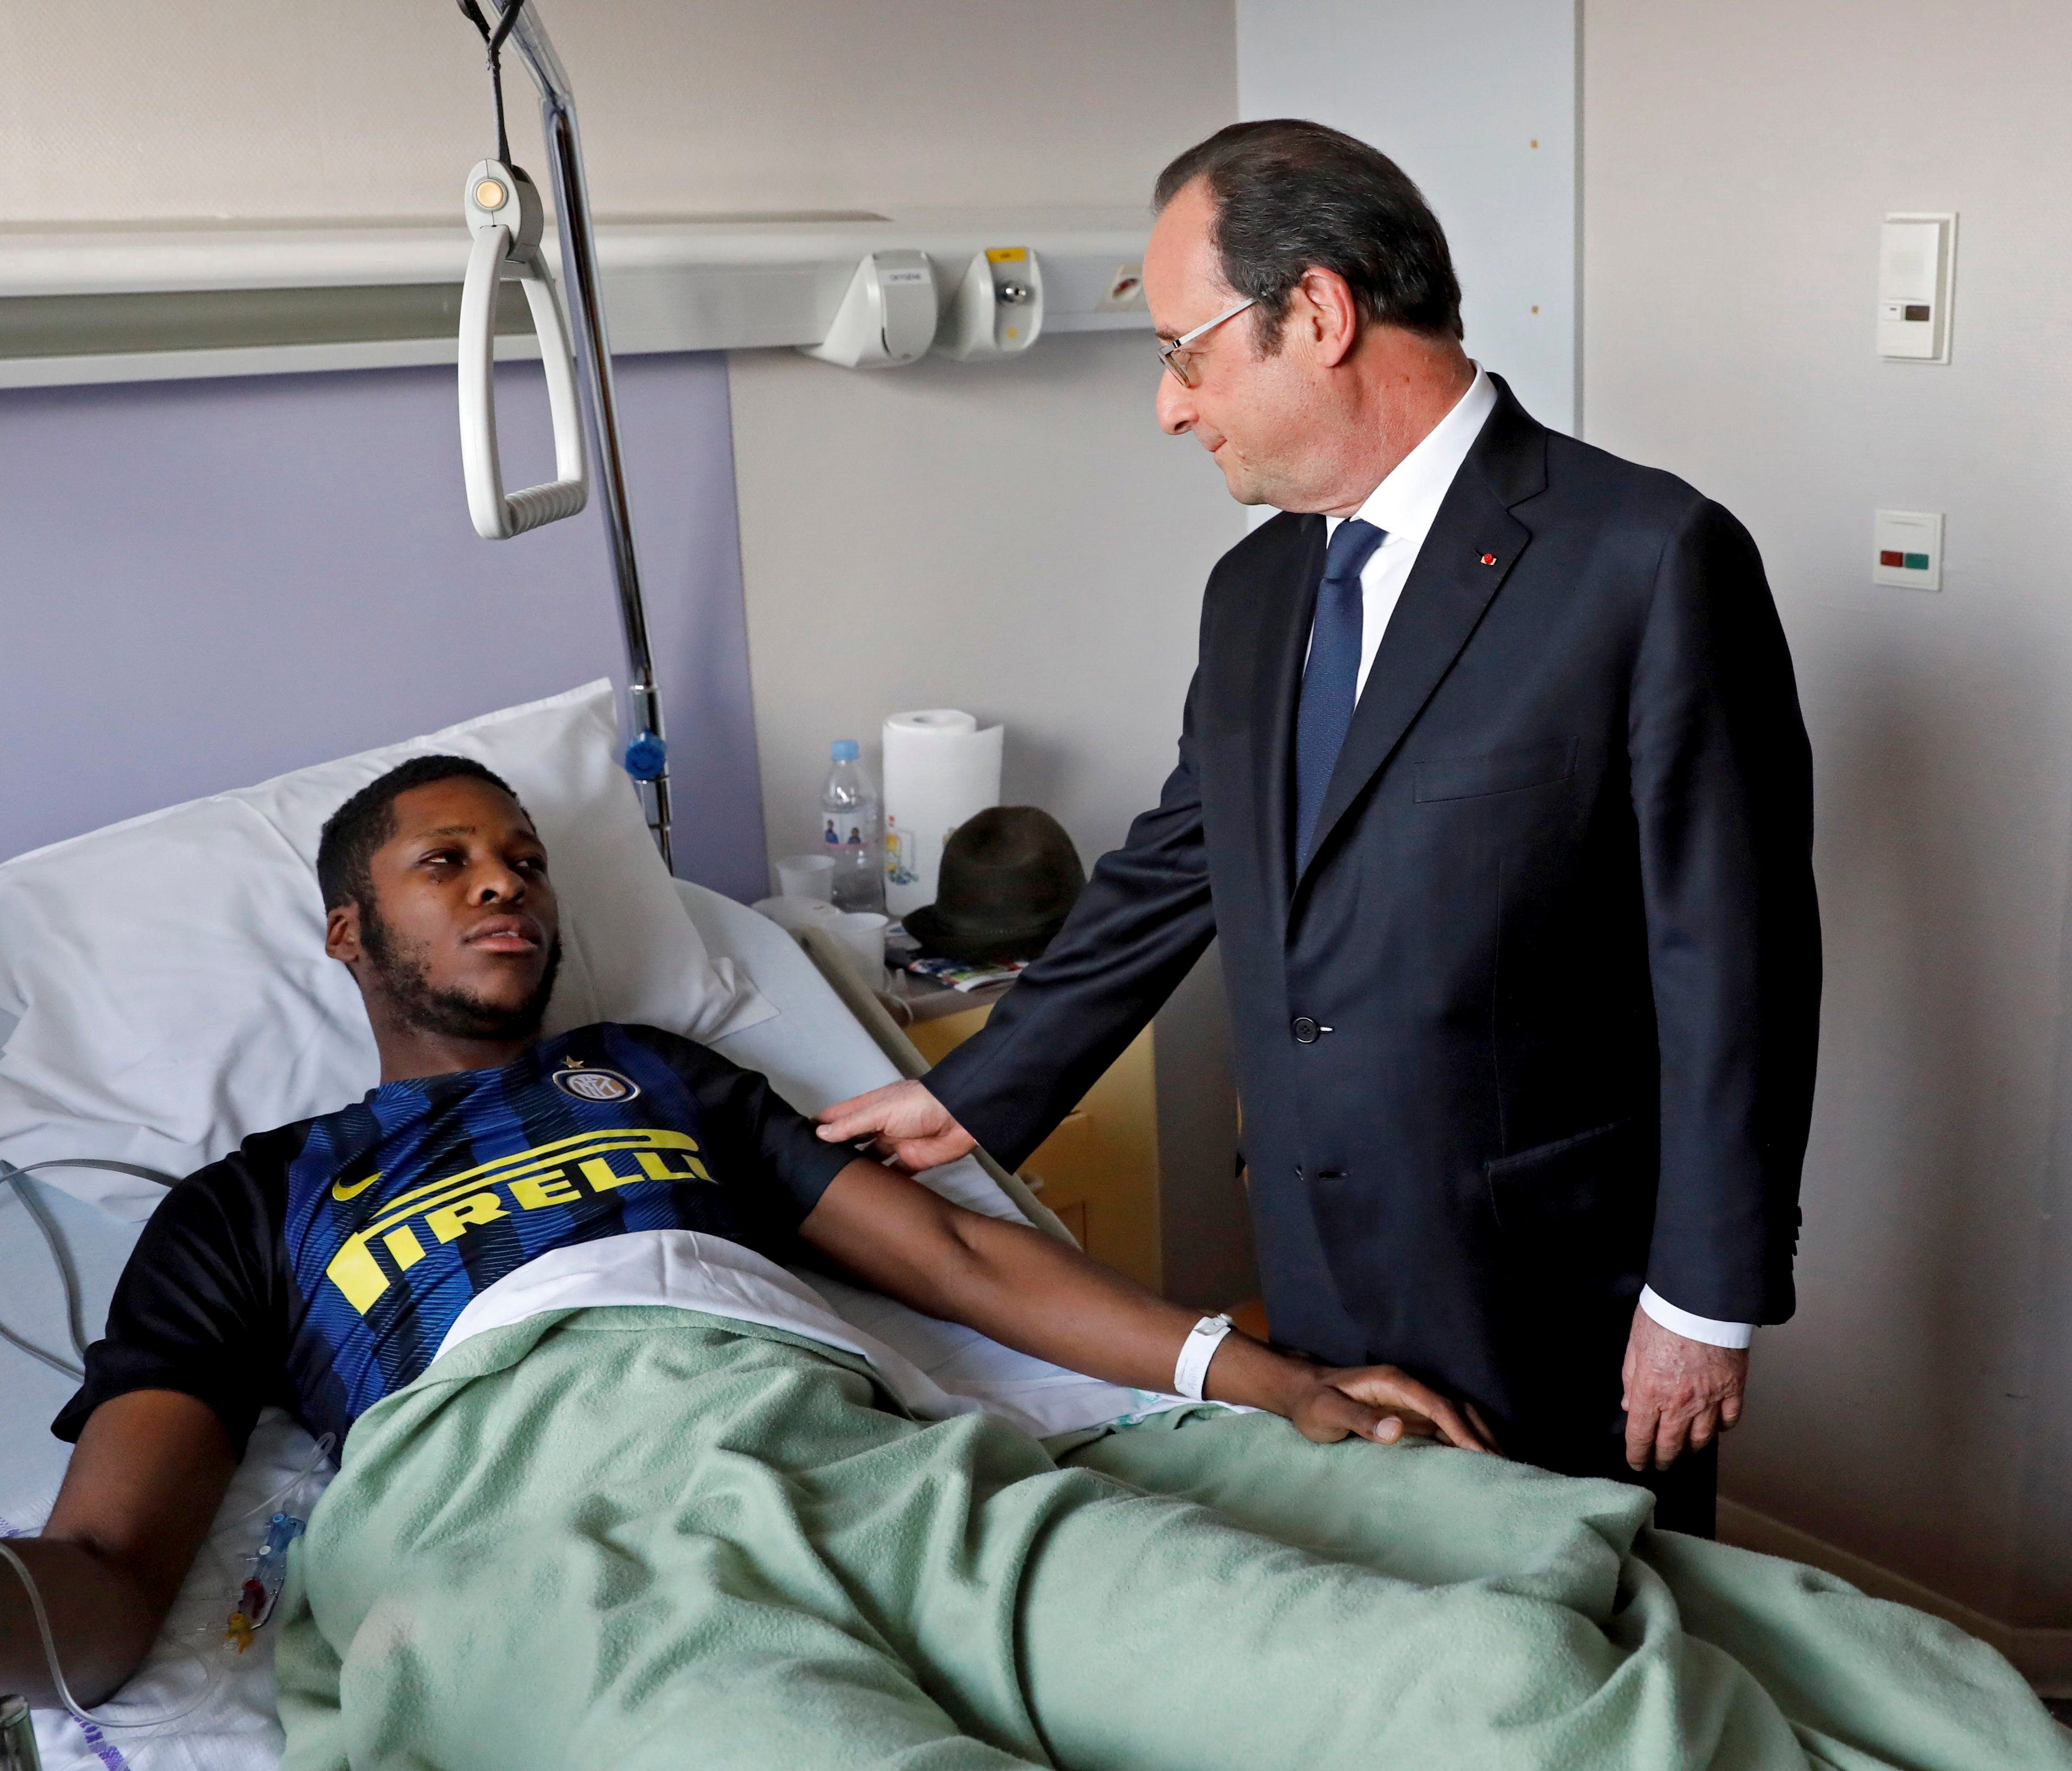 A handout photo made available by French newspaper Le Parisen on Feb. 8, 2017, shows French President Francois Hollande,right, visiting a man identified by police only as Theo at the Robert Ballanger hospital in Aulnay-sous-Bois, a suburb of Paris, o